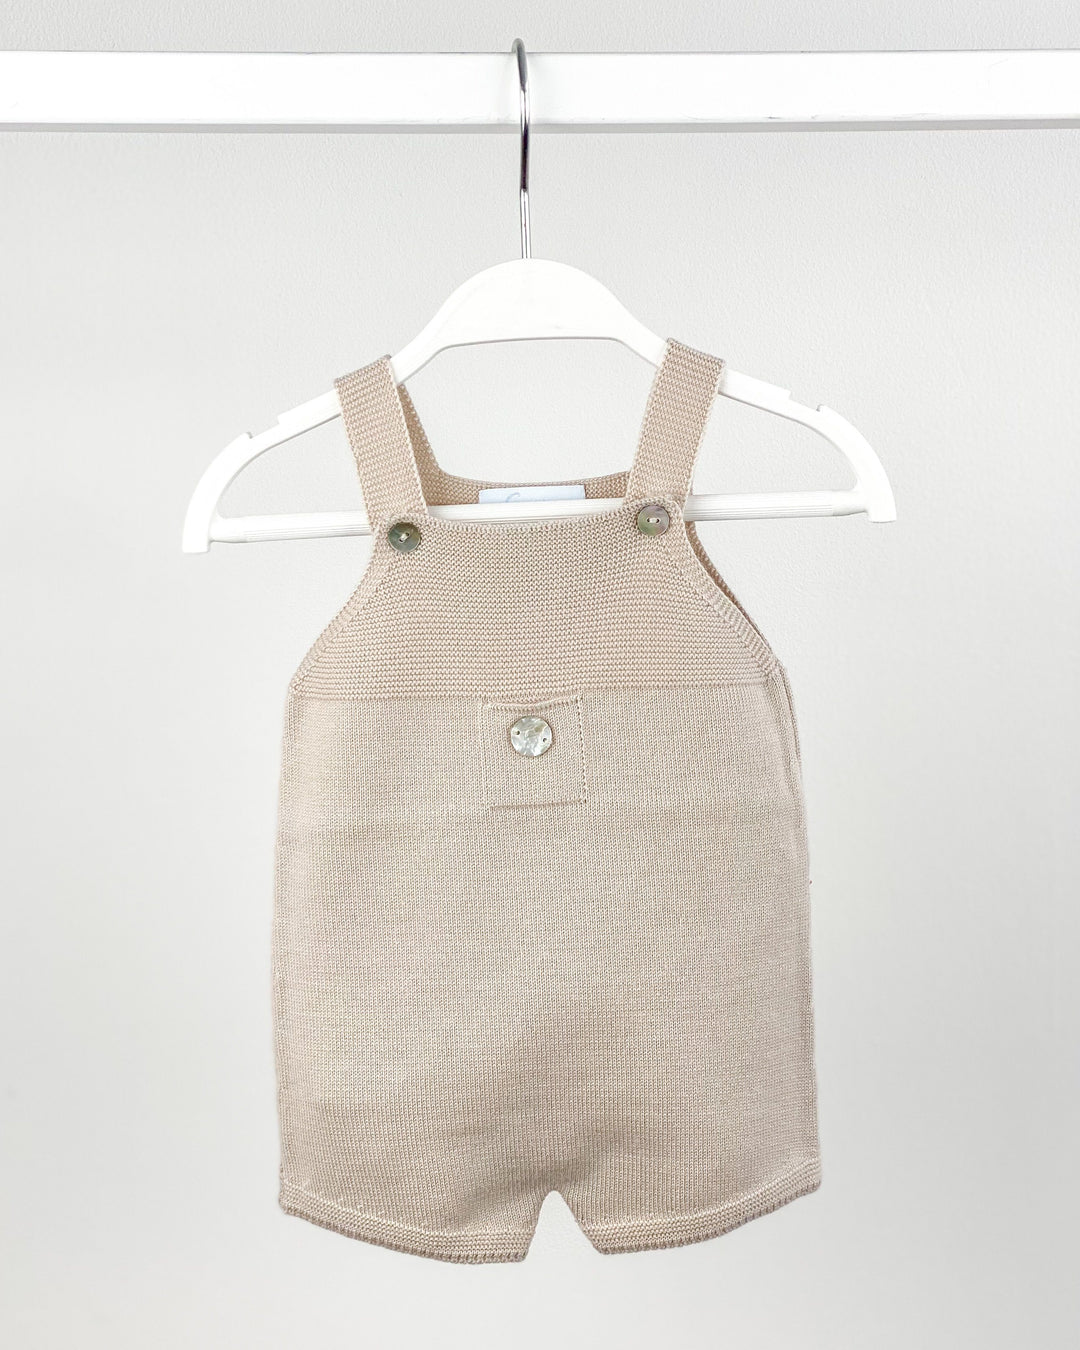 Granlei Classic Short Knitted Dungarees - Stone | Millie and John